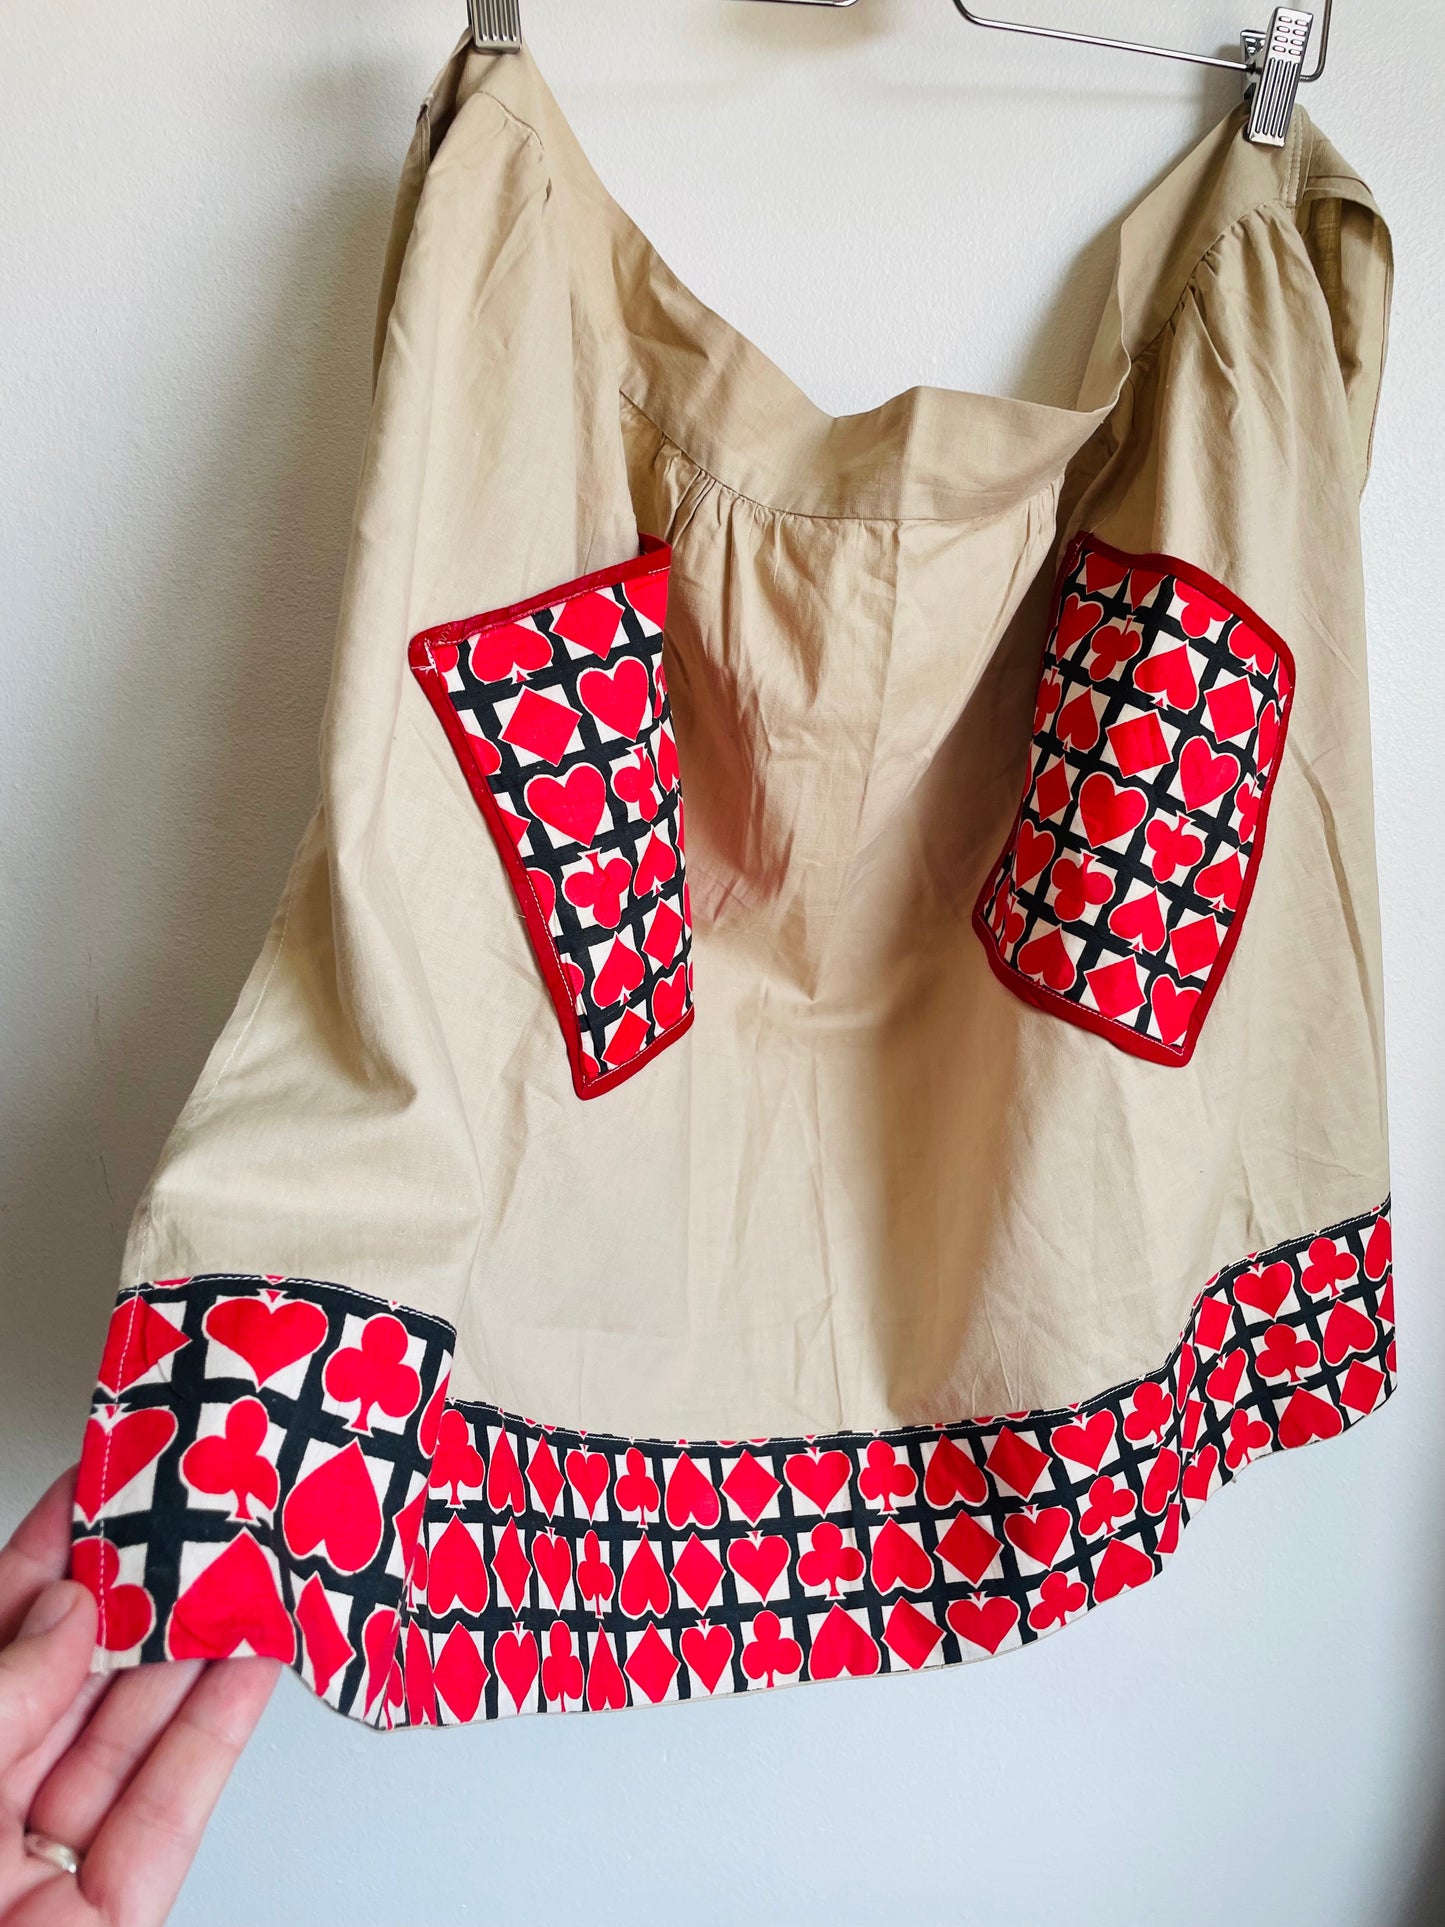 Game Night Waist Tie Apron with Pockets & Card Deck Graphics - Red Clubs, Diamonds, Hearts & Spades